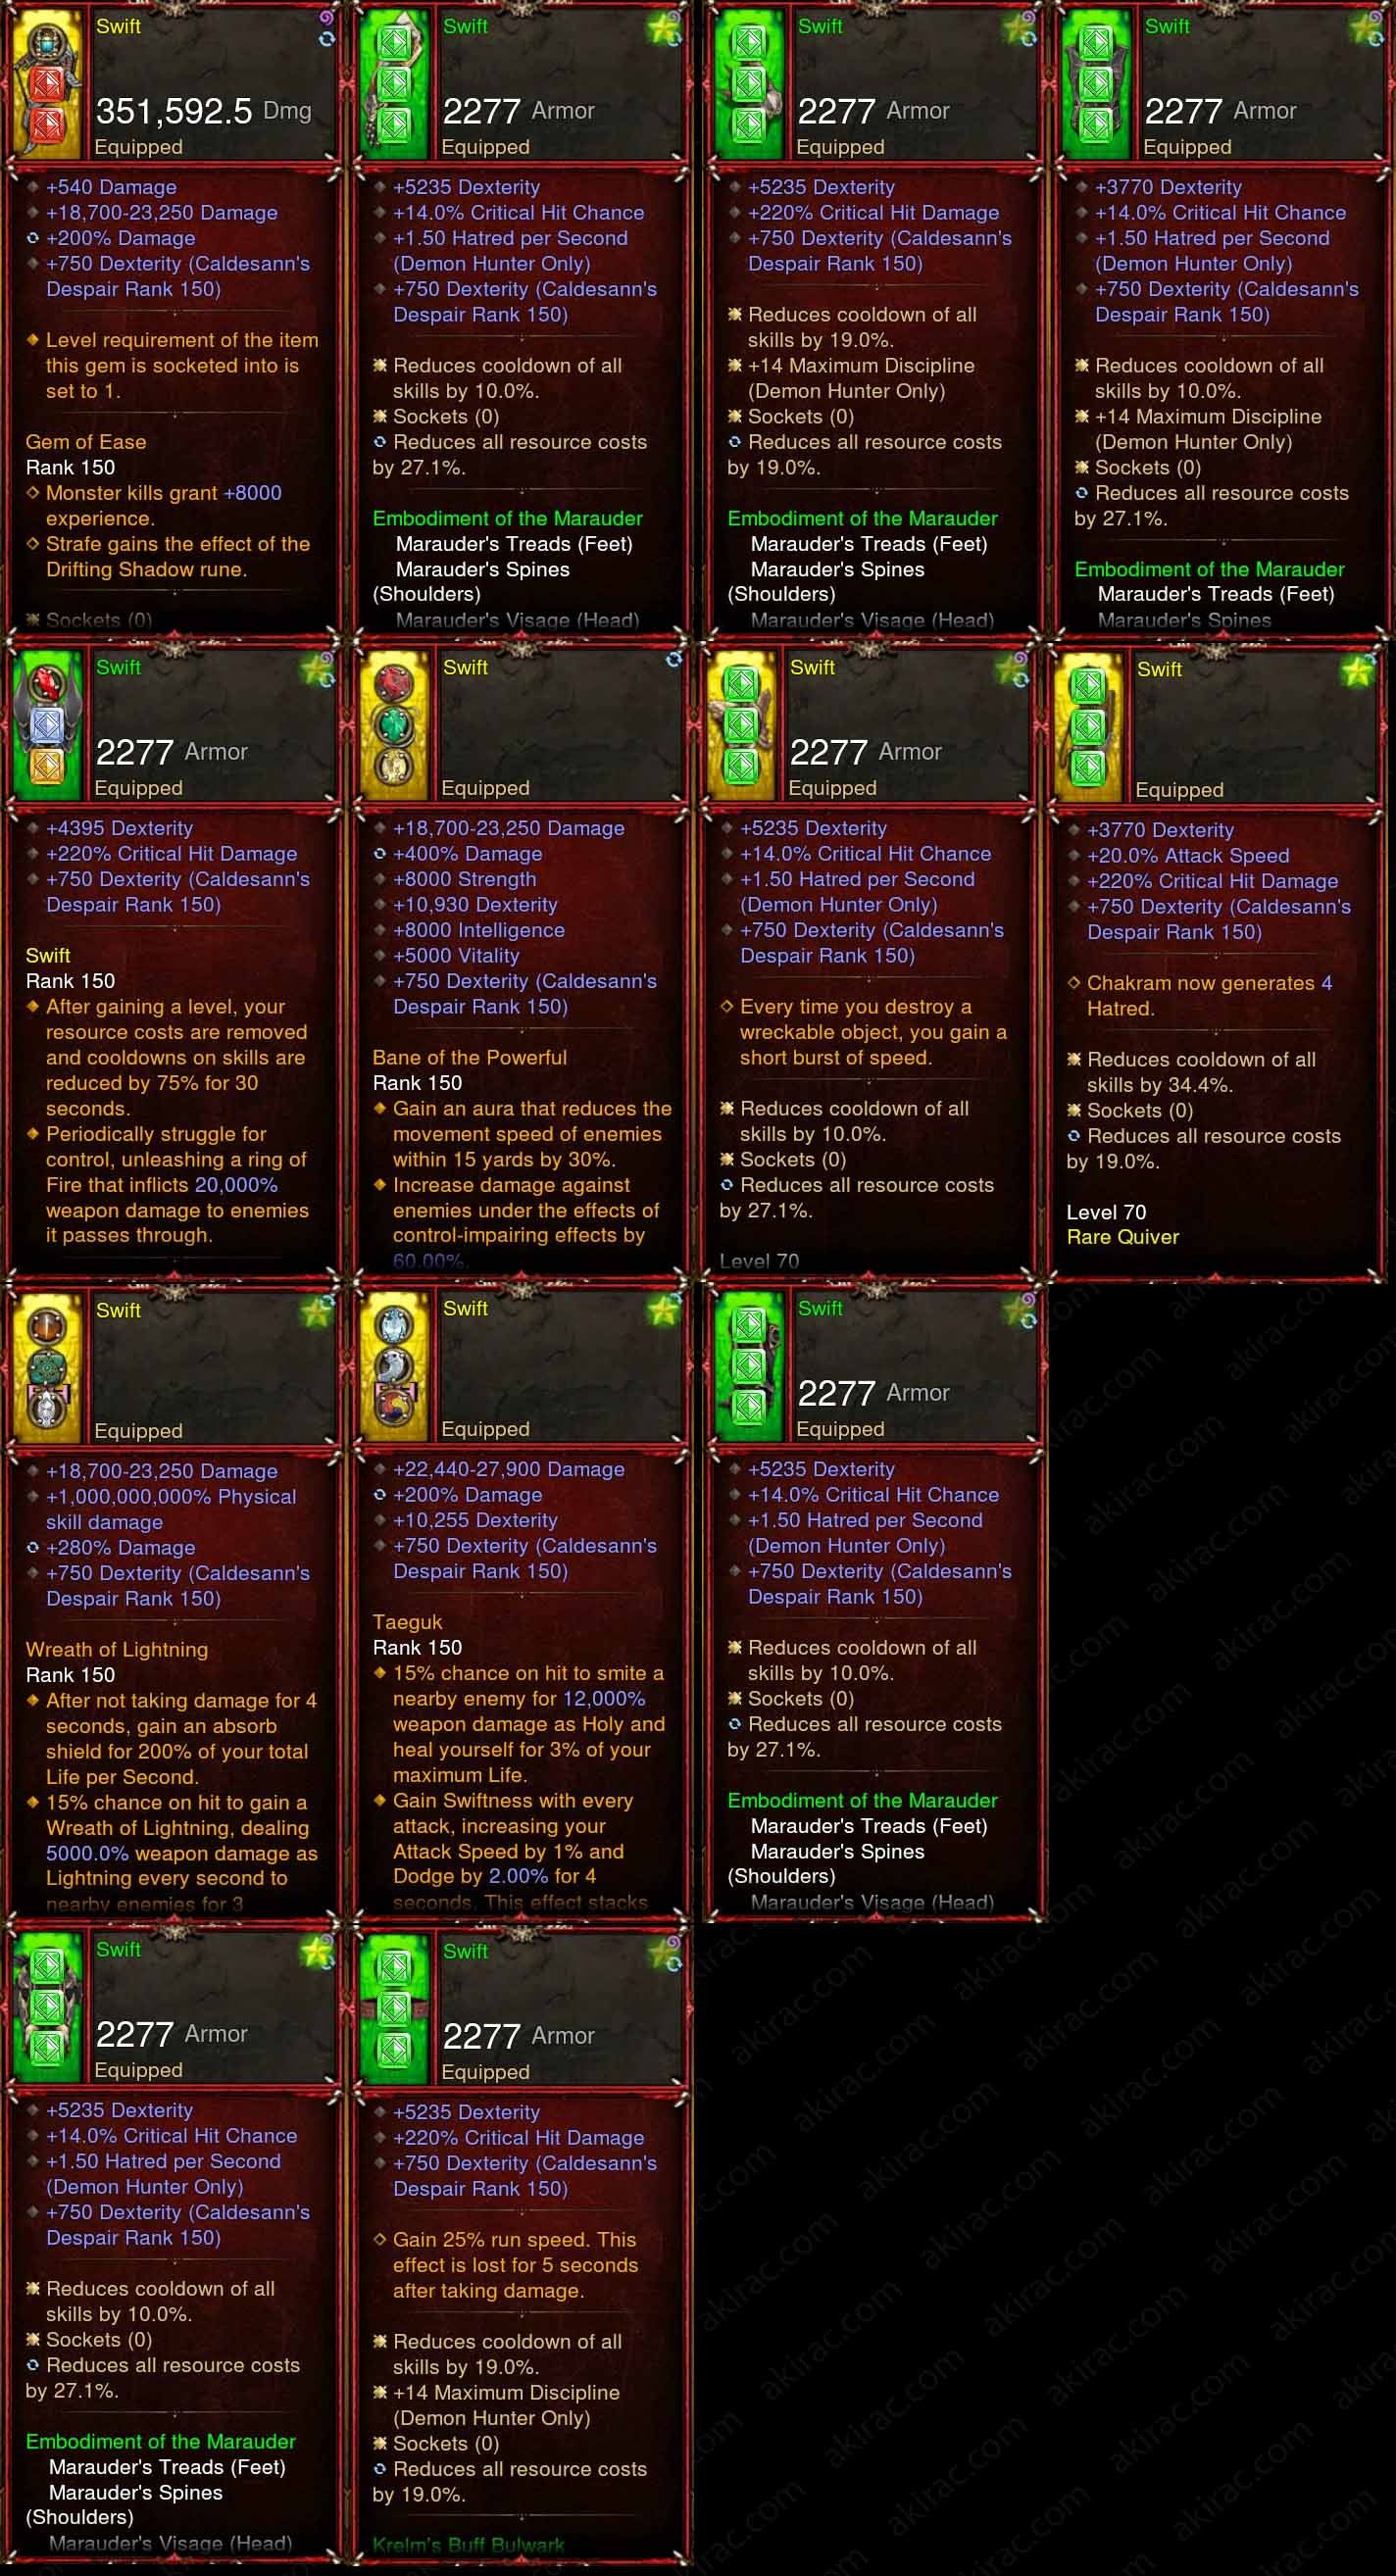 [Primal Ancient] (Infinite Hatred) Diablo 3 Immortal v3 Marauder Demon Hunter Rift 150 Swift Diablo 3 Mods ROS Seasonal and Non Seasonal Save Mod - Modded Items and Gear - Hacks - Cheats - Trainers for Playstation 4 - Playstation 5 - Nintendo Switch - Xbox One